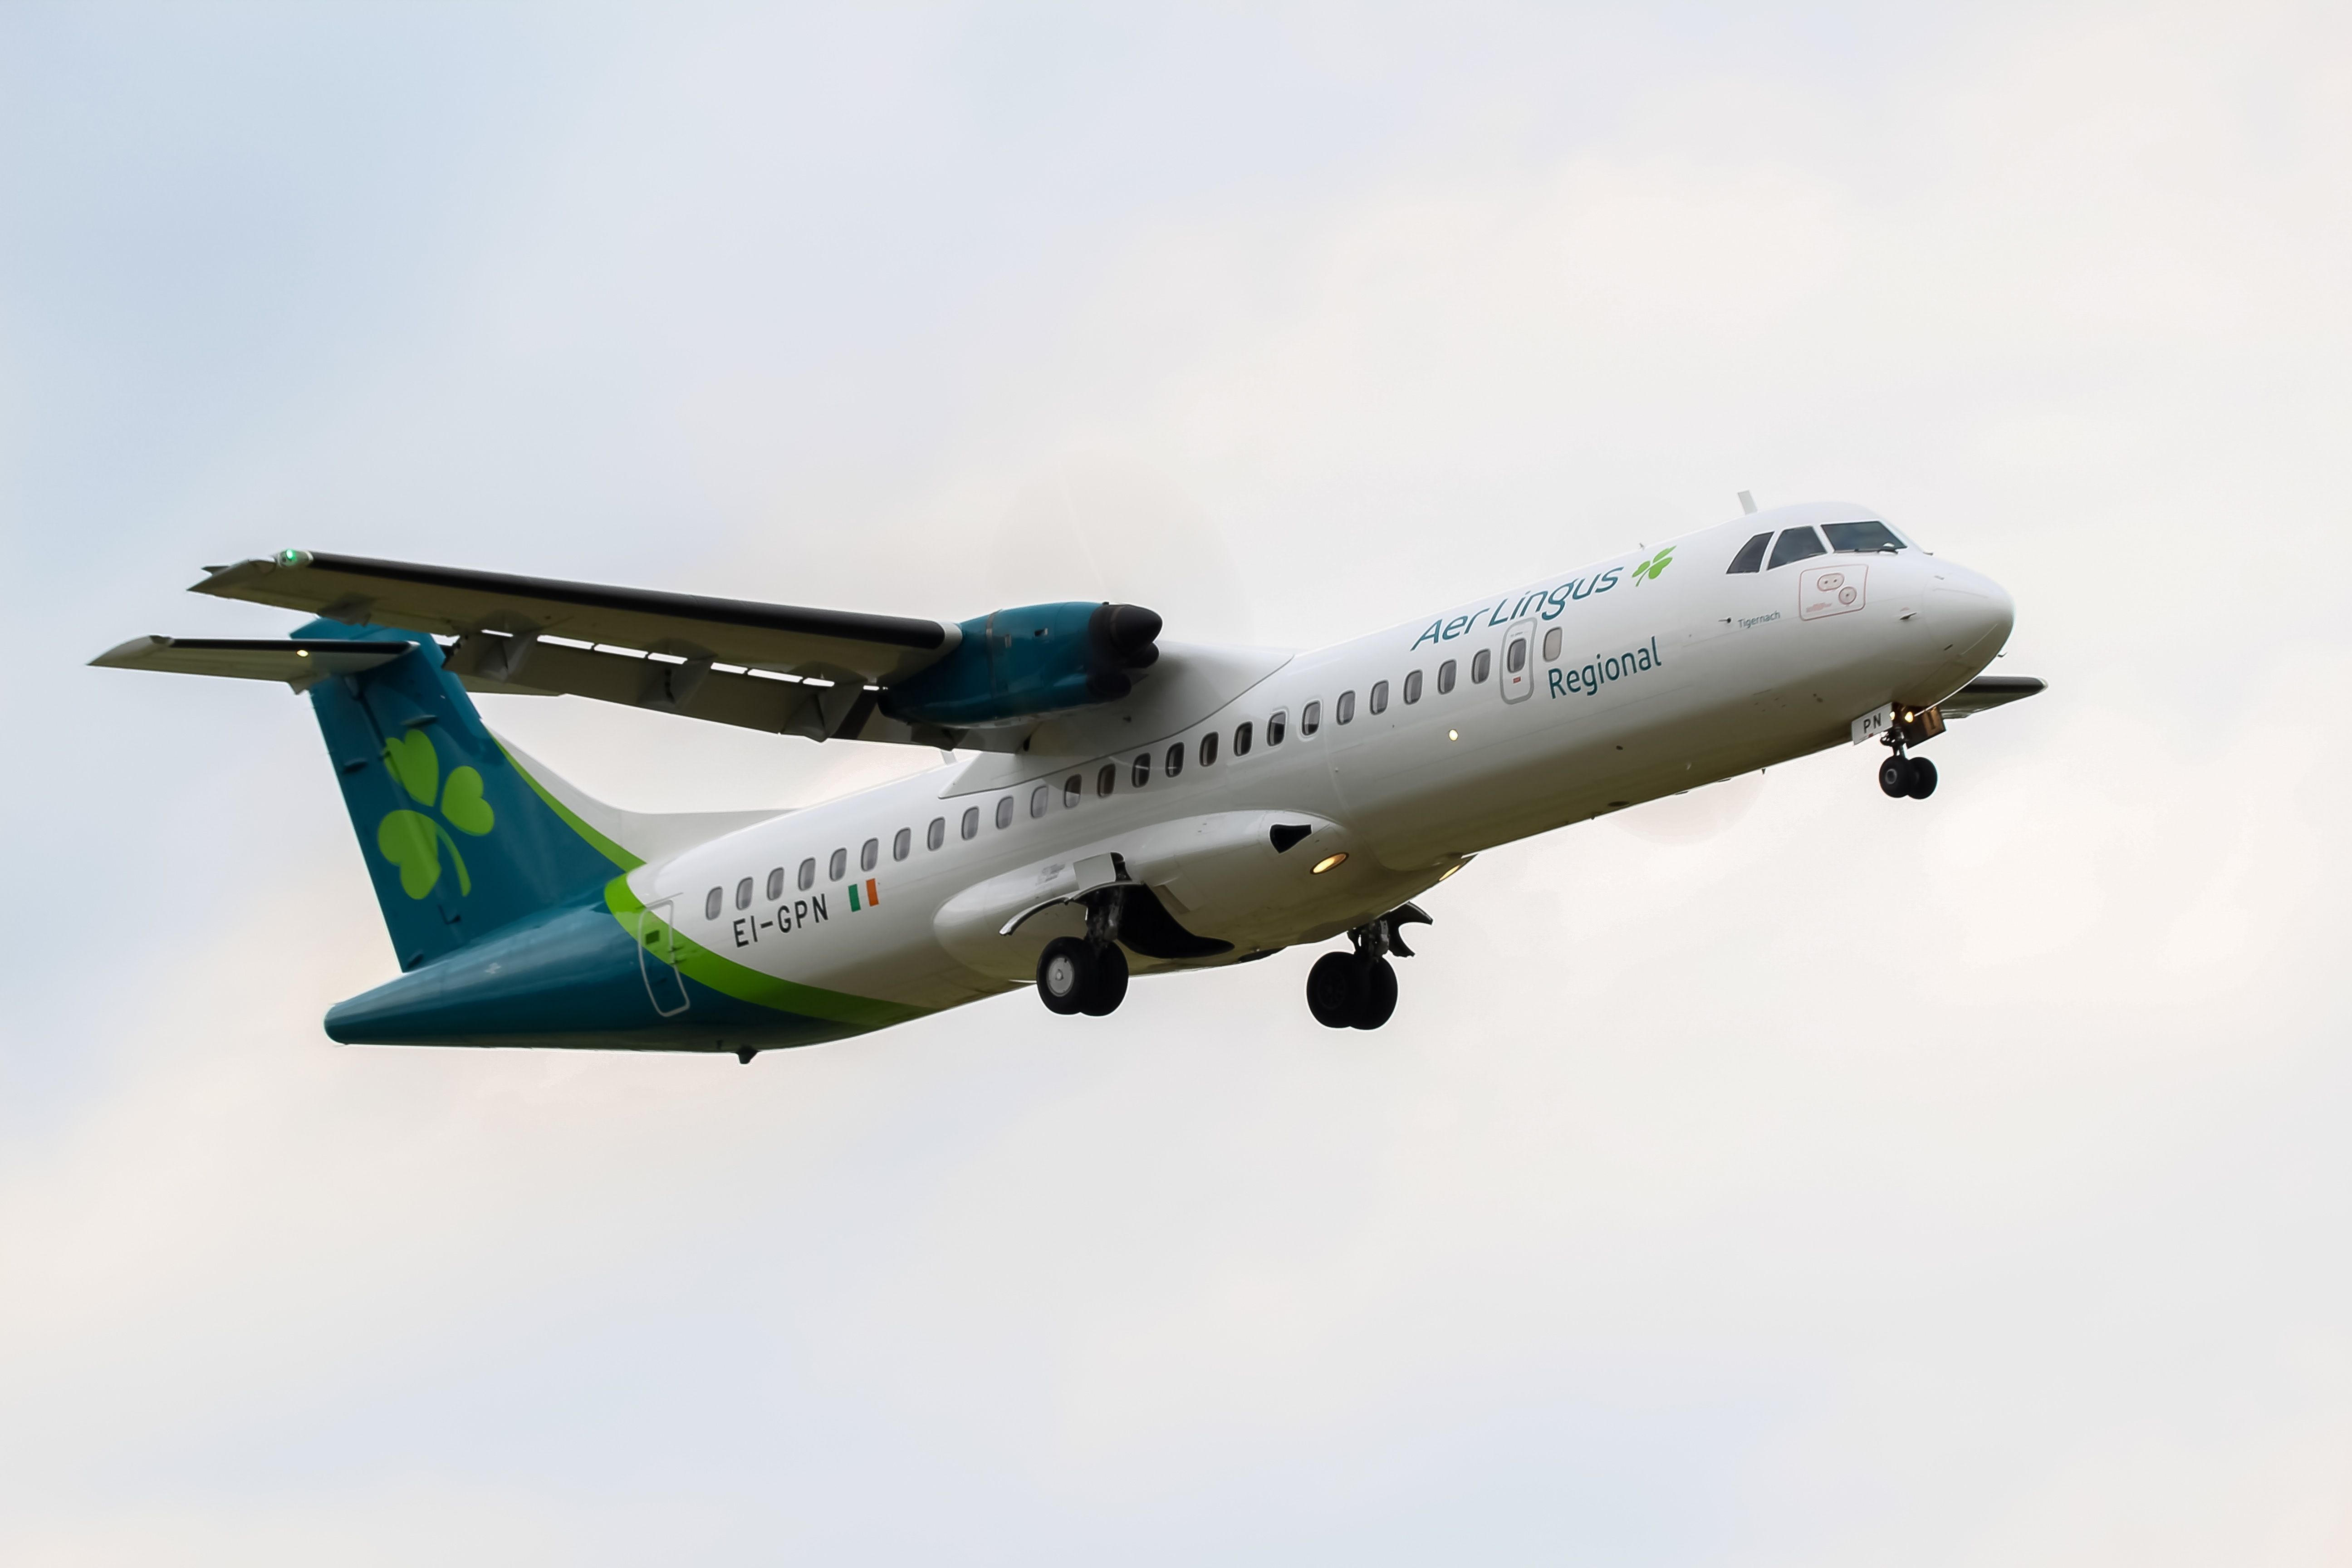 Aer Lingus Regional (operated by Emerald Airlines) ATR 72-600 on apporach.